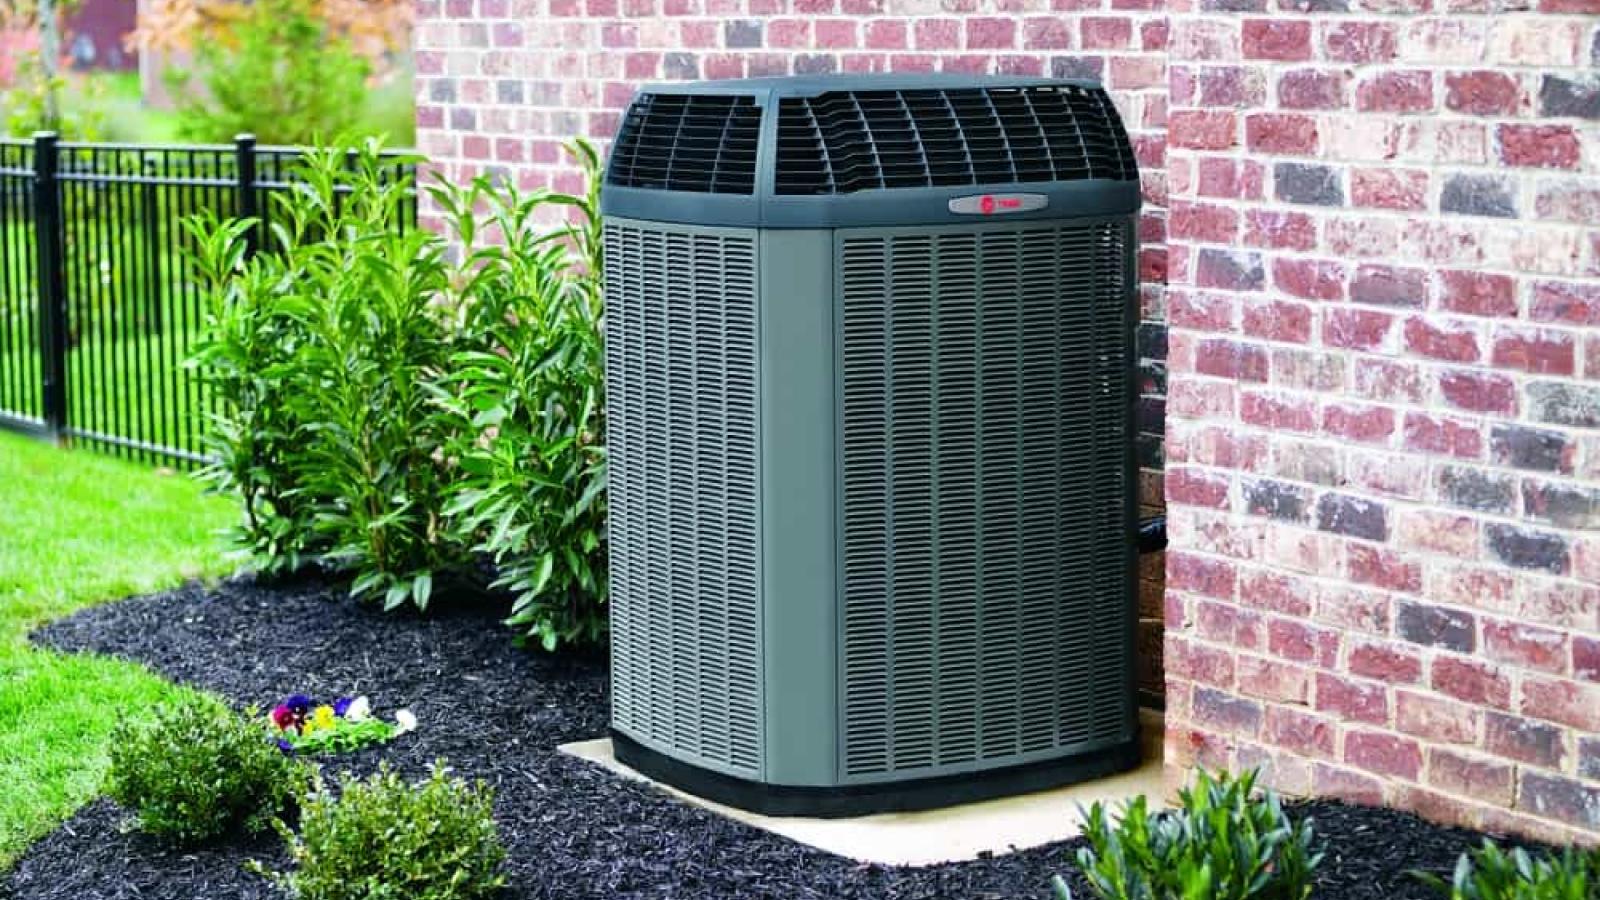 An outdoor Trane HVAC system sits between a red brick wall and green plants.